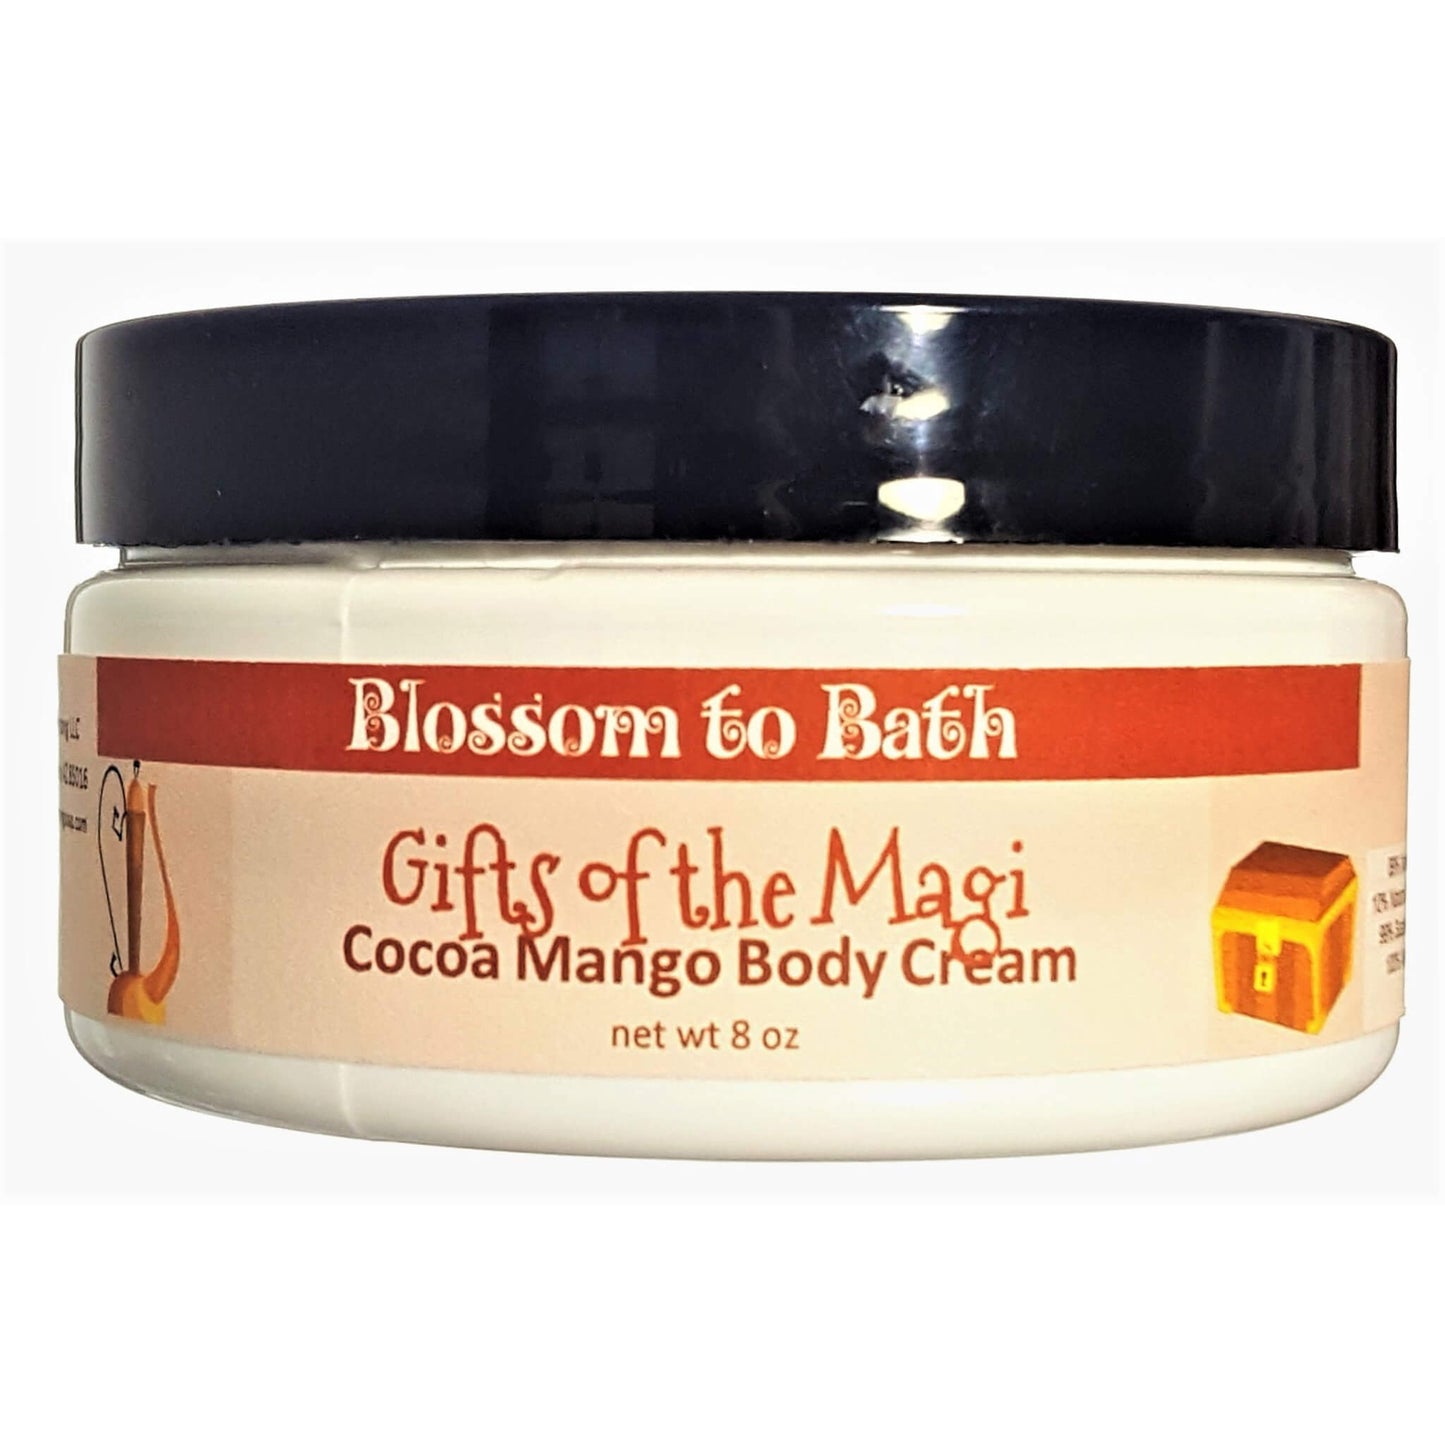 Buy Blossom to Bath Gifts of the Magi Cocoa Mango Body Cream from Flowersong Soap Studio.  Rich organic butters  soften and moisturize even the roughest skin all day  Celebrate the soulful side of the holiday spirit with warm spices and incense.